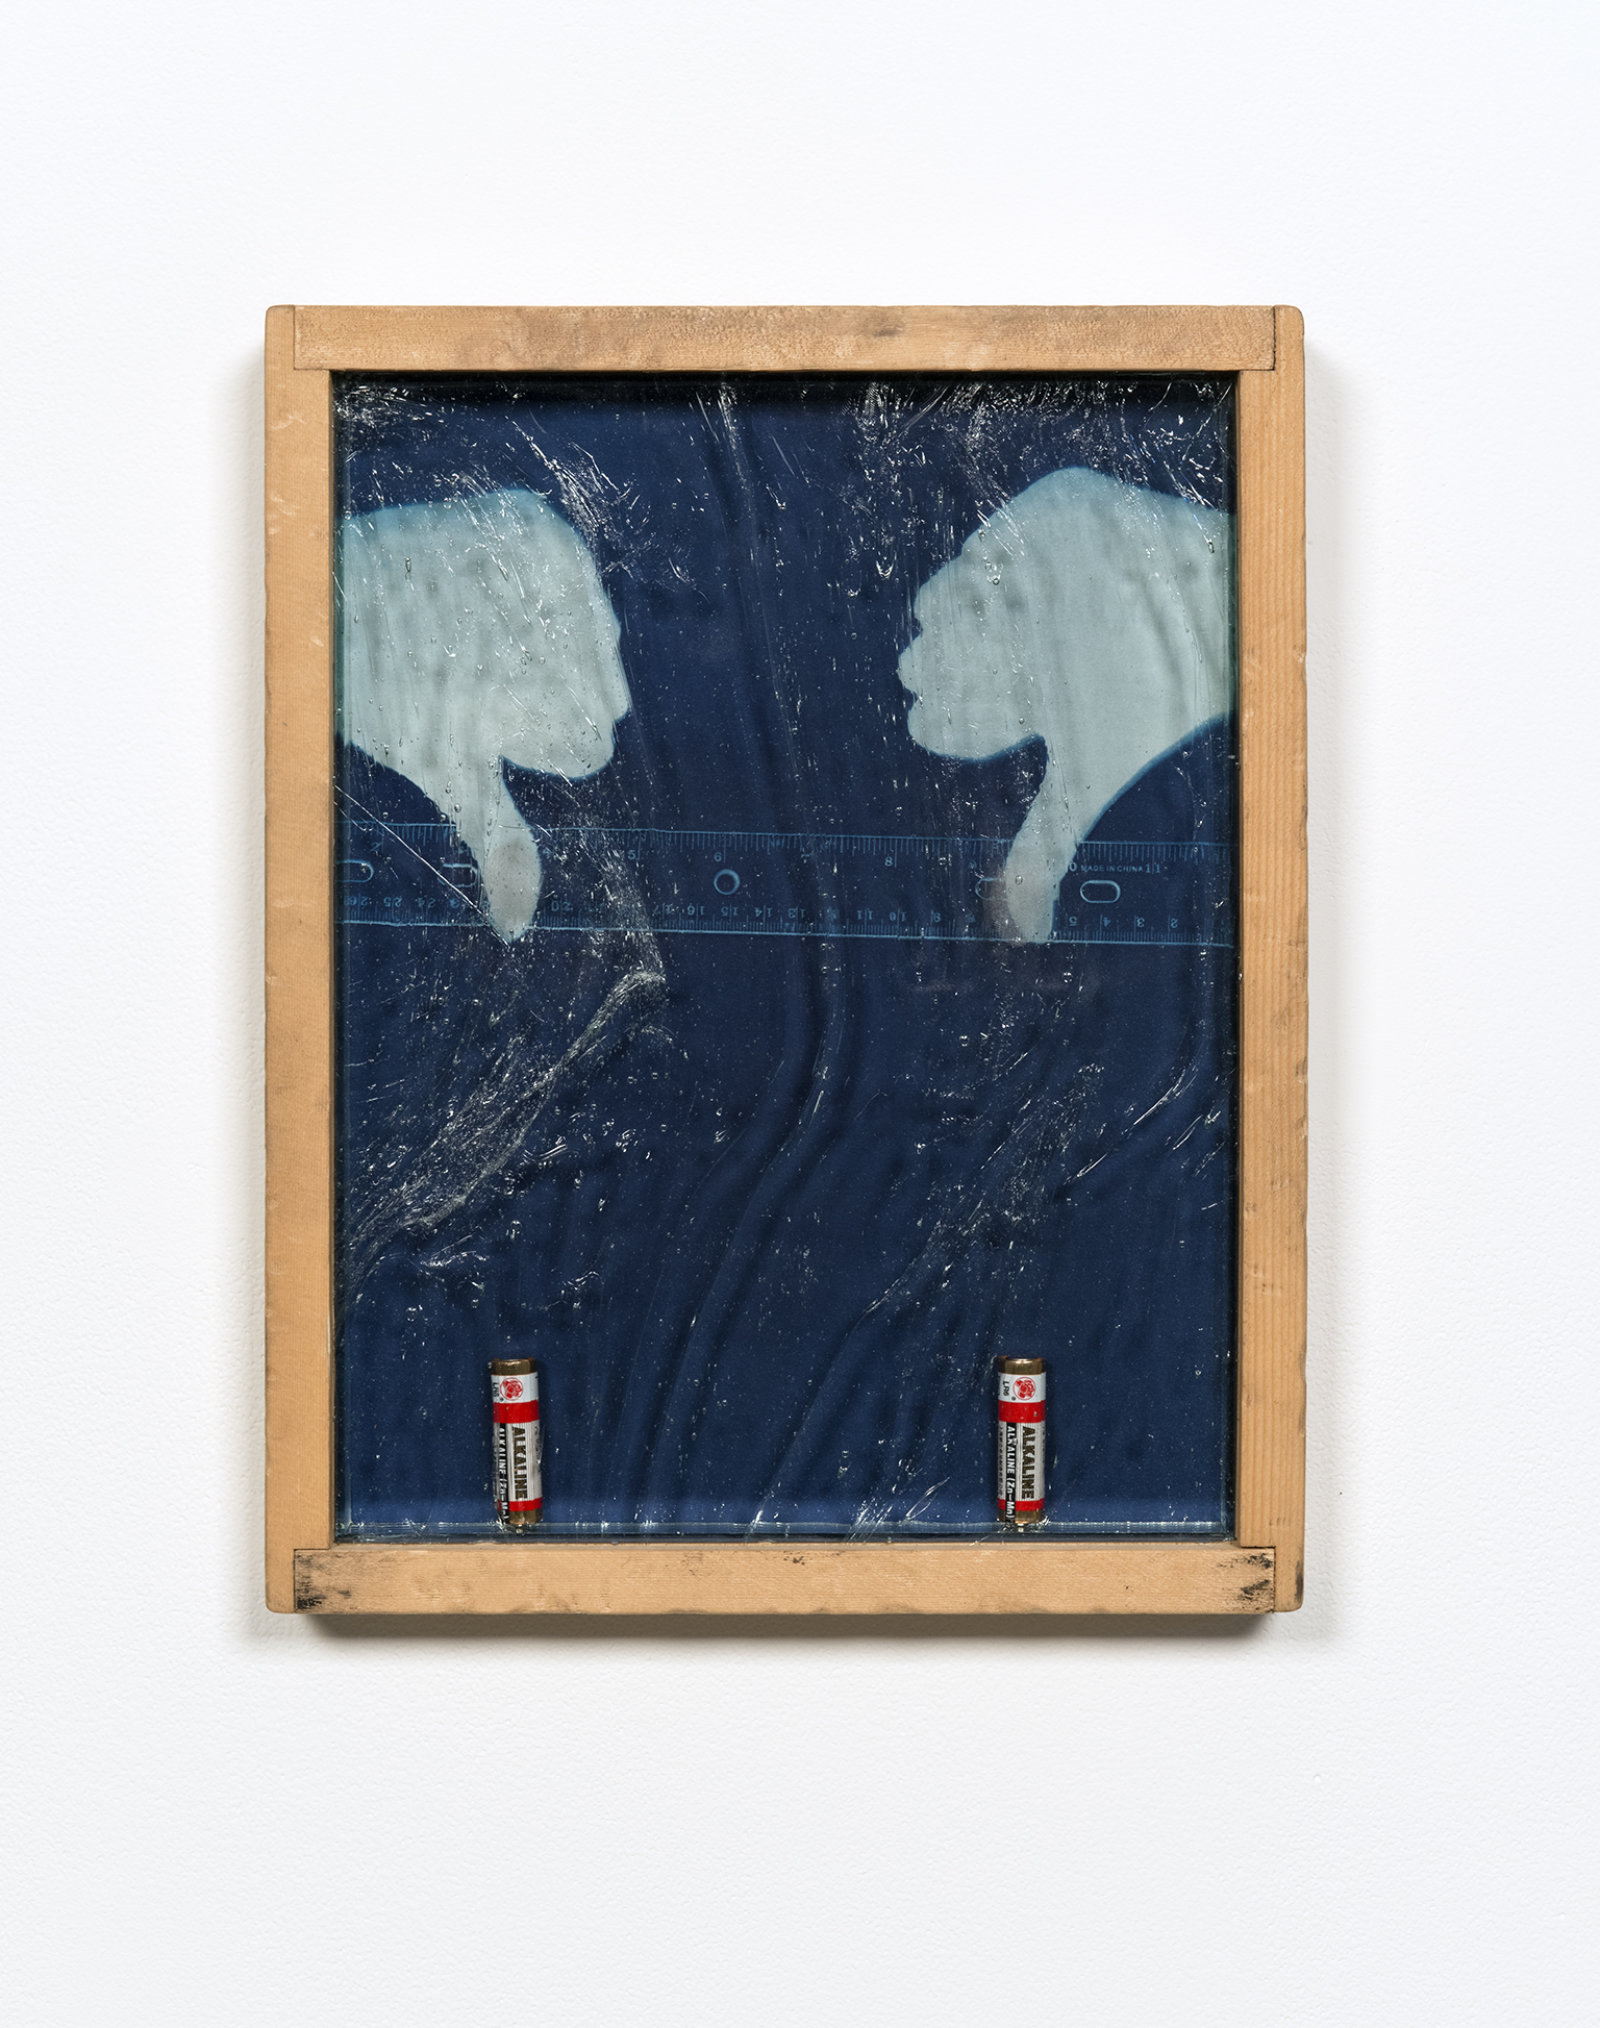 Kasper Feyrer, Rule of thumbs: Double Negative, 2012, antiqued/distressed pine wood frame (beaten with chain, orange pekoe stain), cyanotype on watercolour paper, two dead aa alkaline batteries, magnets, mirror inset, “alte deutsch” architectural glass, thumb fingerprints dusted with bi-chromatic fingerprint powder, 15 x 12 in. (39 x 30 cm)